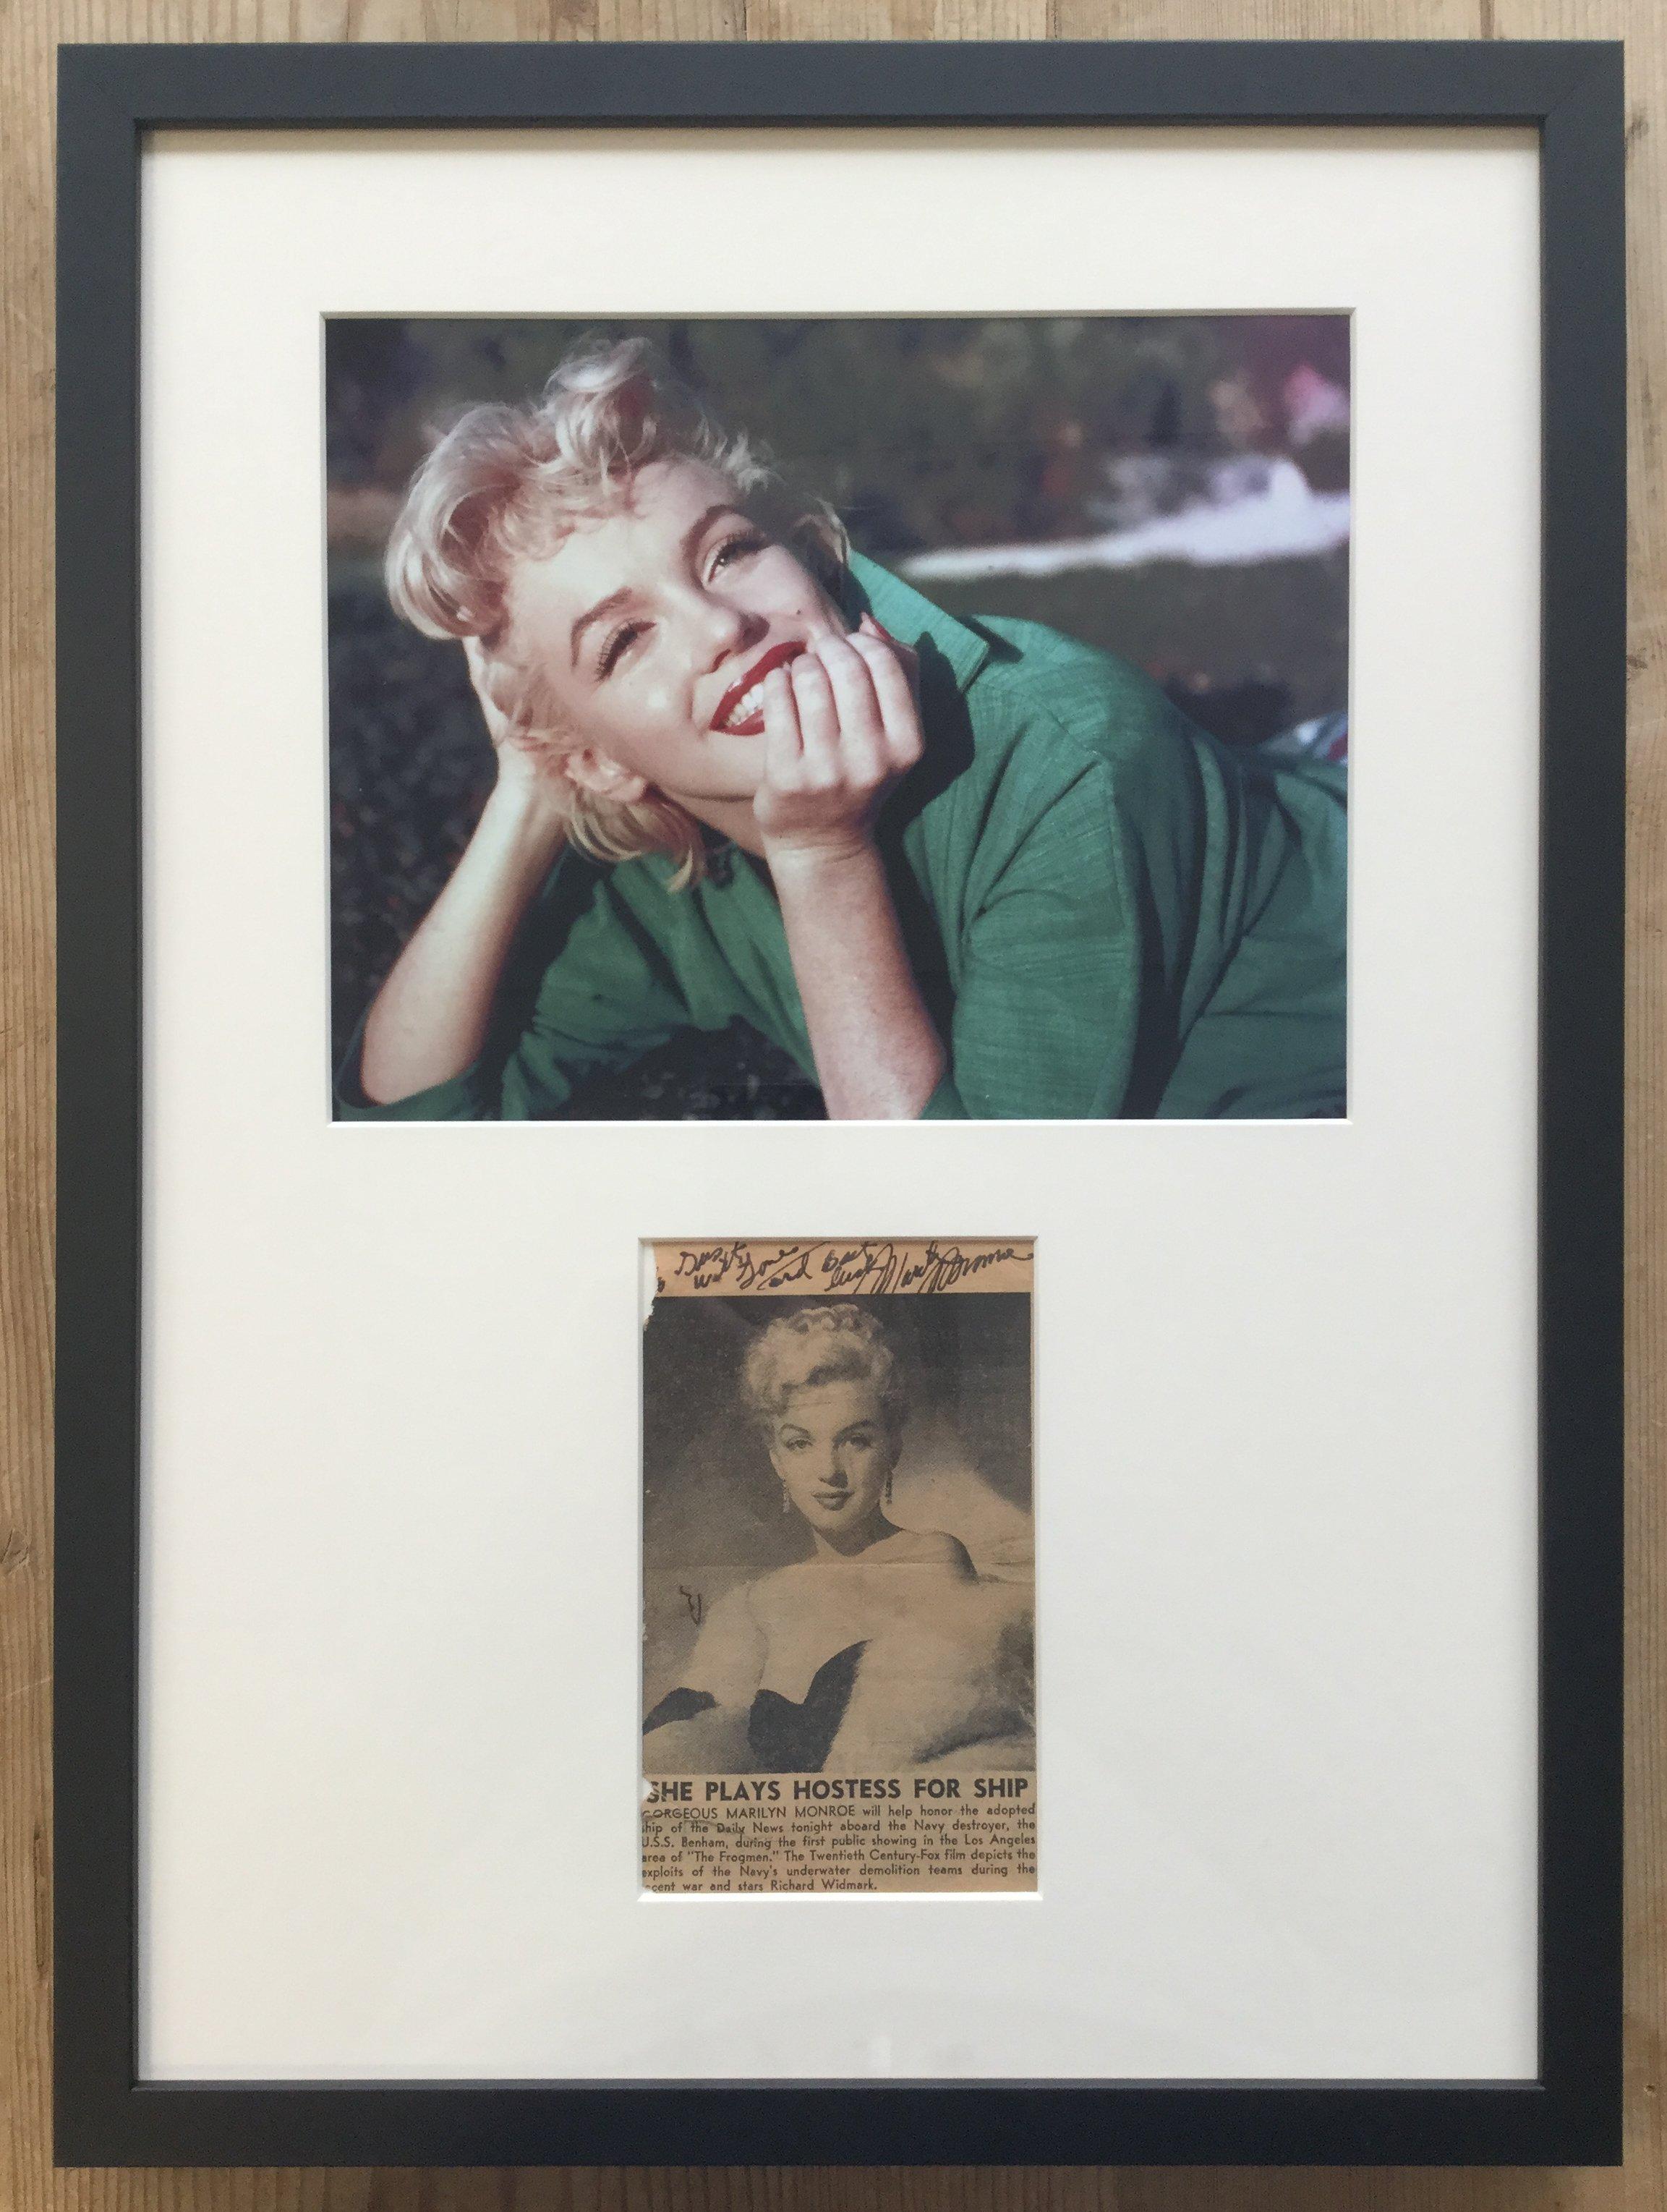 - Marilyn Monroe autograph on newspaper clipping - beautifully framed with UV-resistant archival glass

- Signed on June 19, 1951 for a US Navy serviceman - superb provenance

Marilyn Monroe (1926-1962) needs little introduction. An actress,